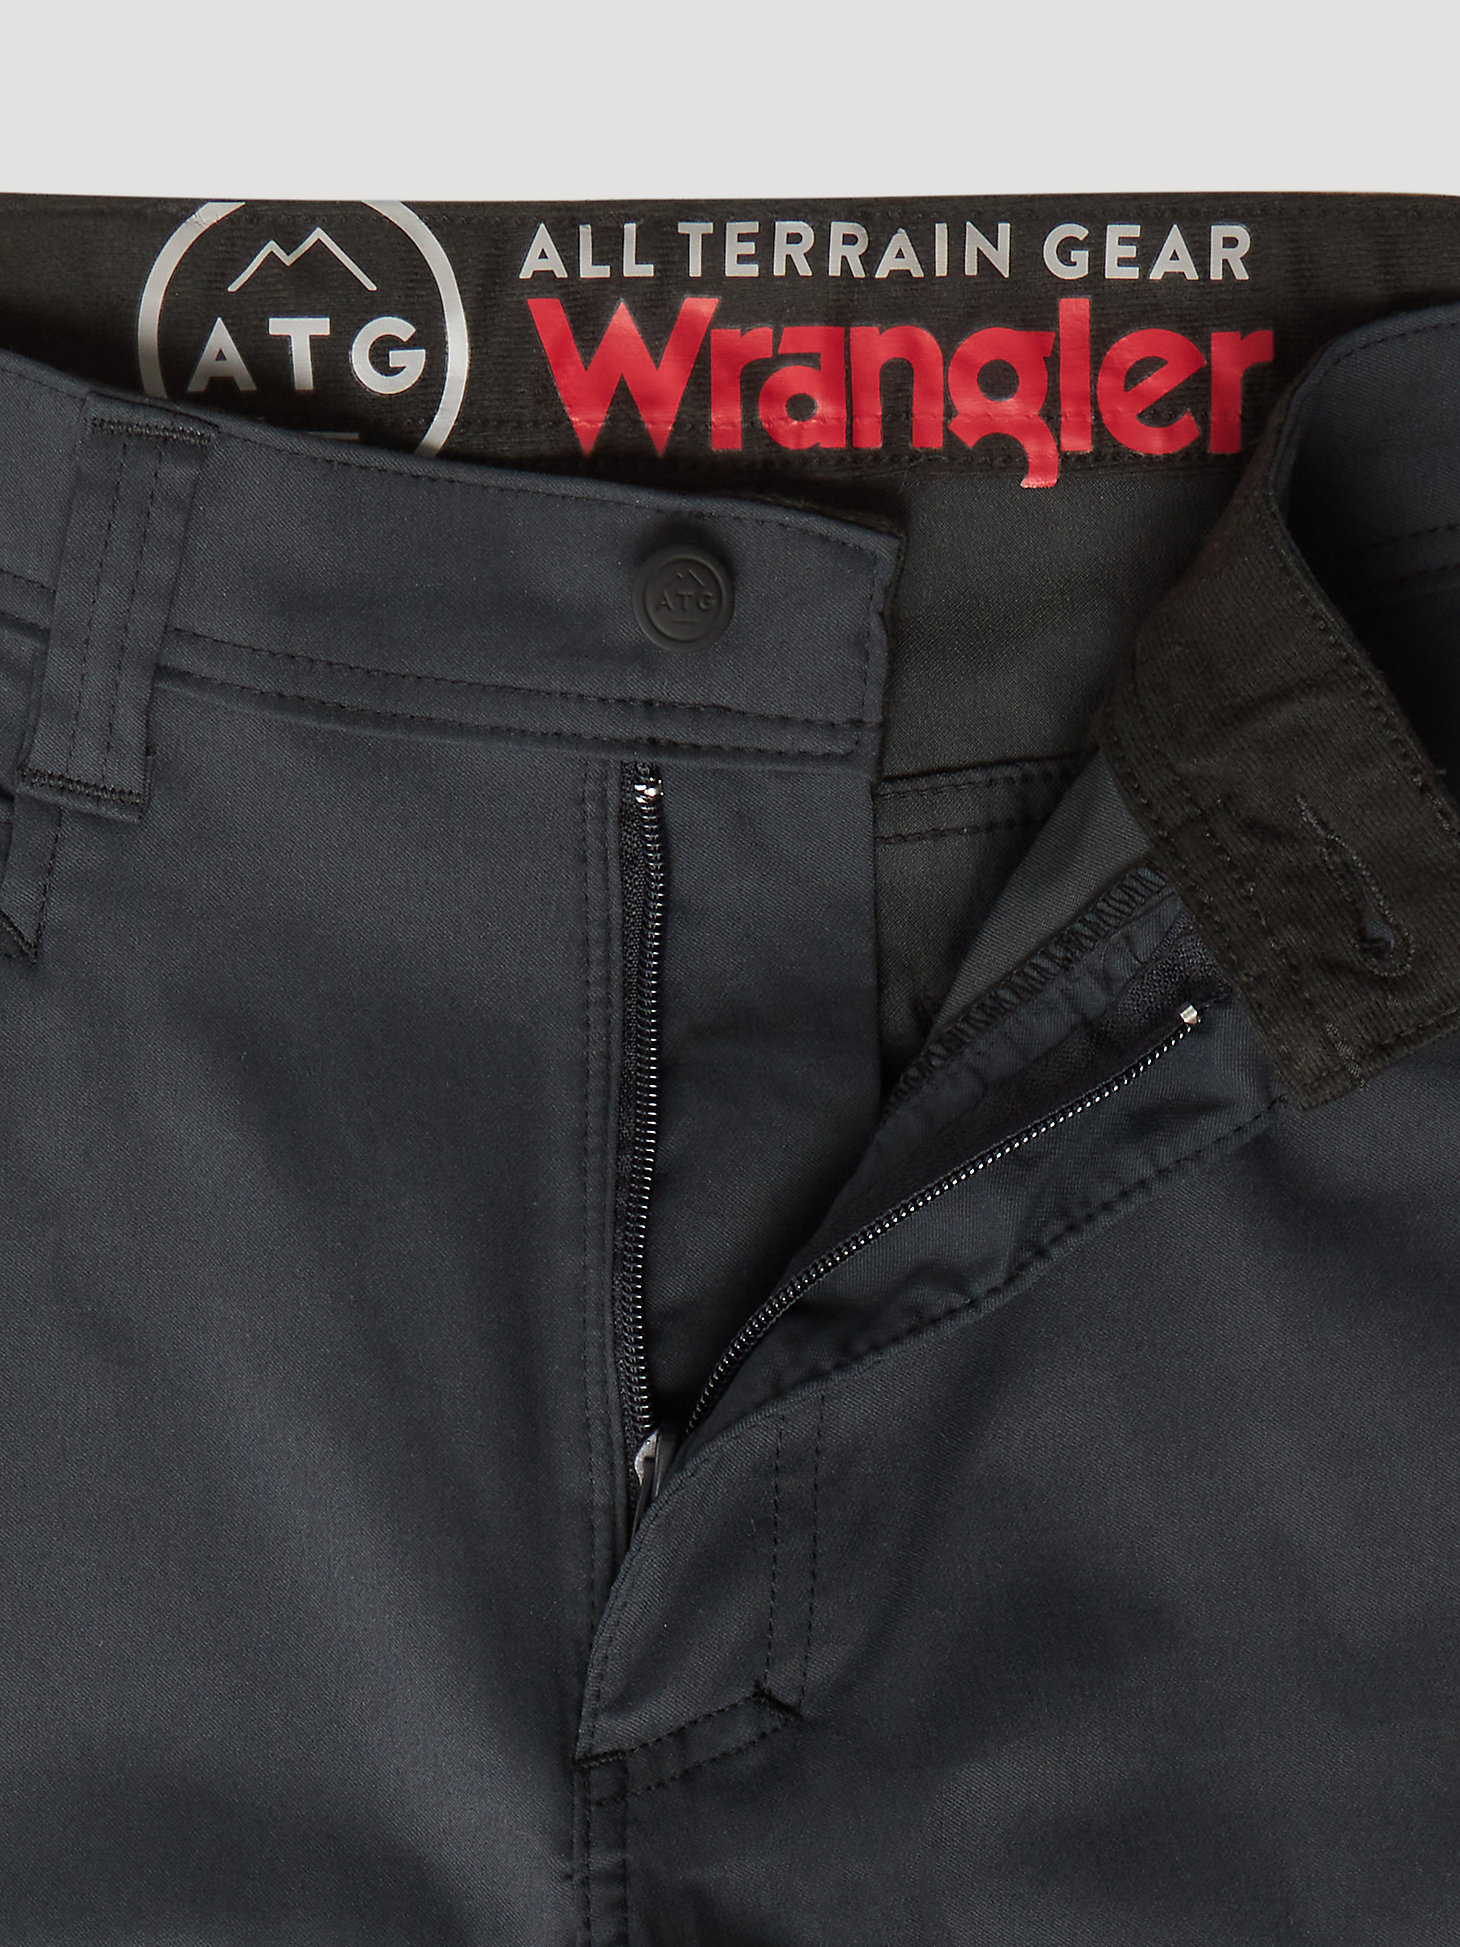 ATG by Wrangler™ Men's Synthetic Utility Pant in Caviar alternative view 11